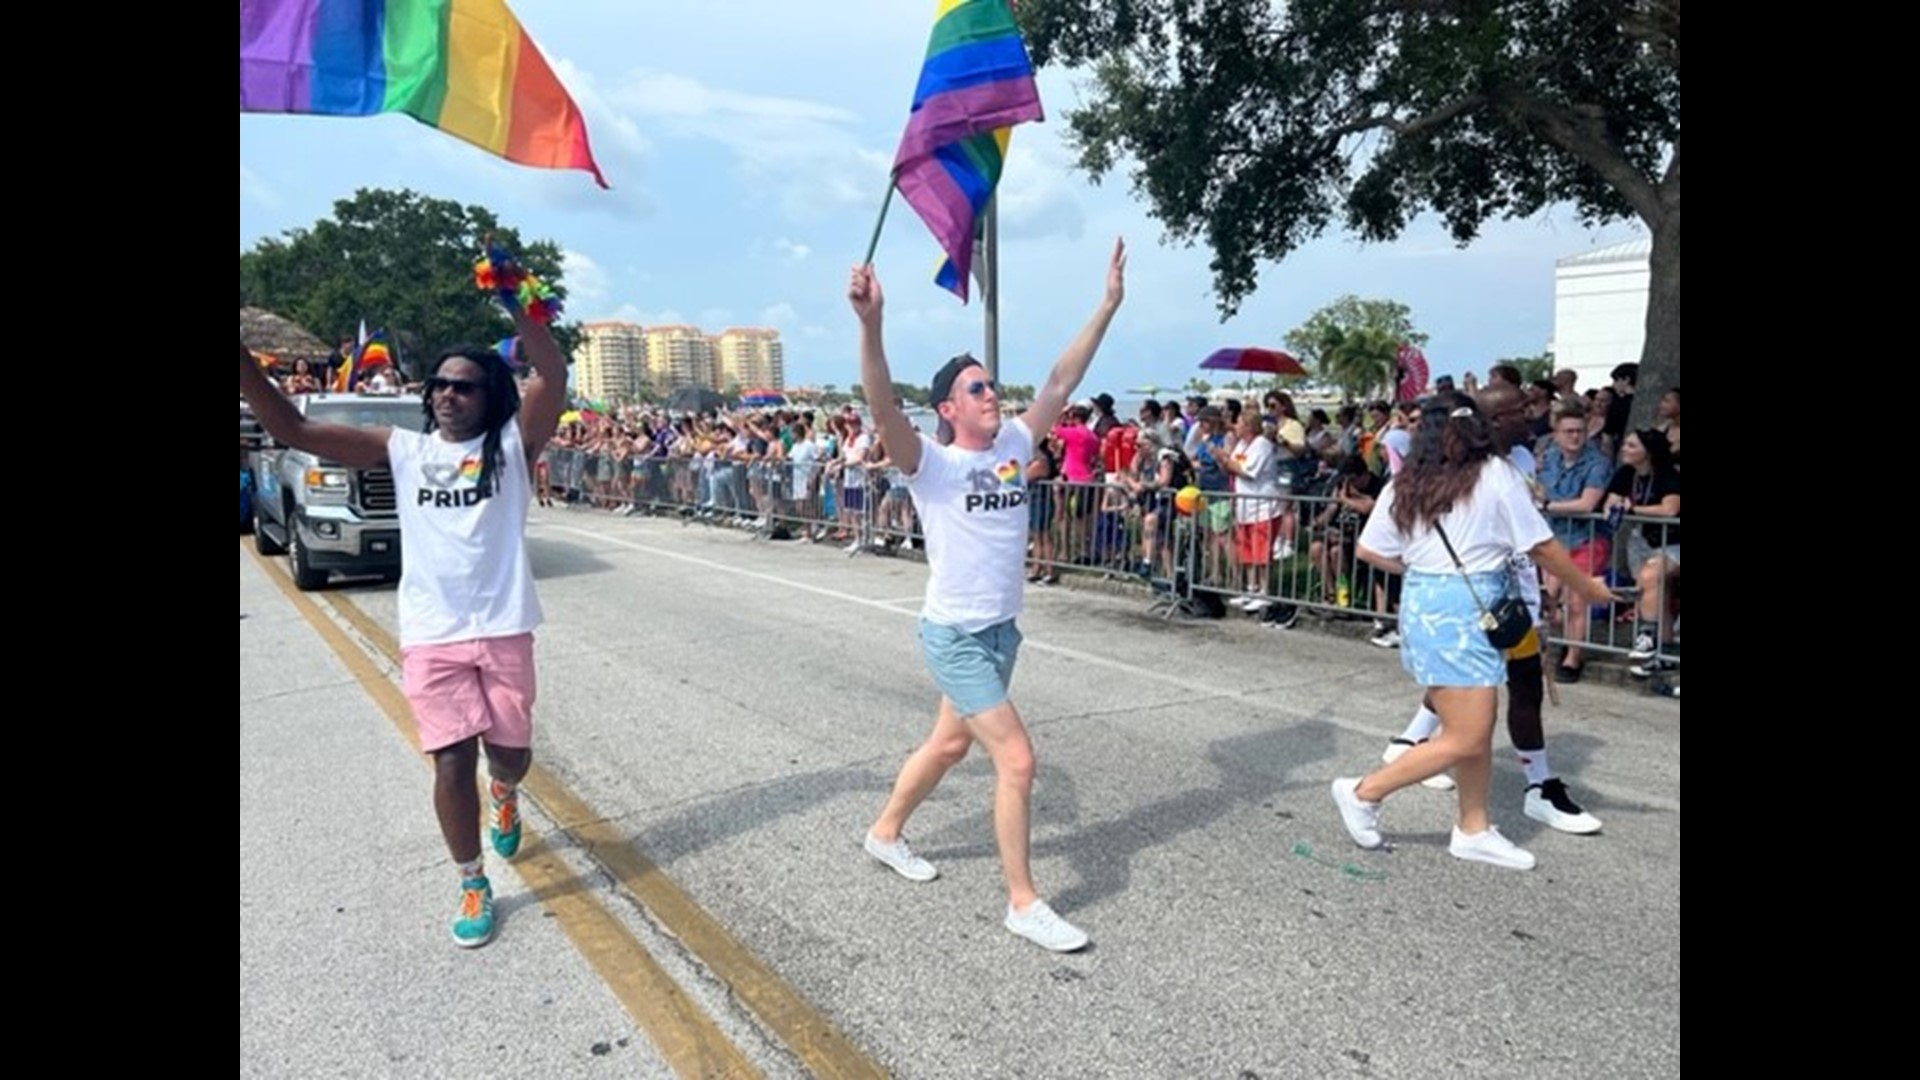 Tens of thousands celebrate St. Pete Pride’s largest parade ever